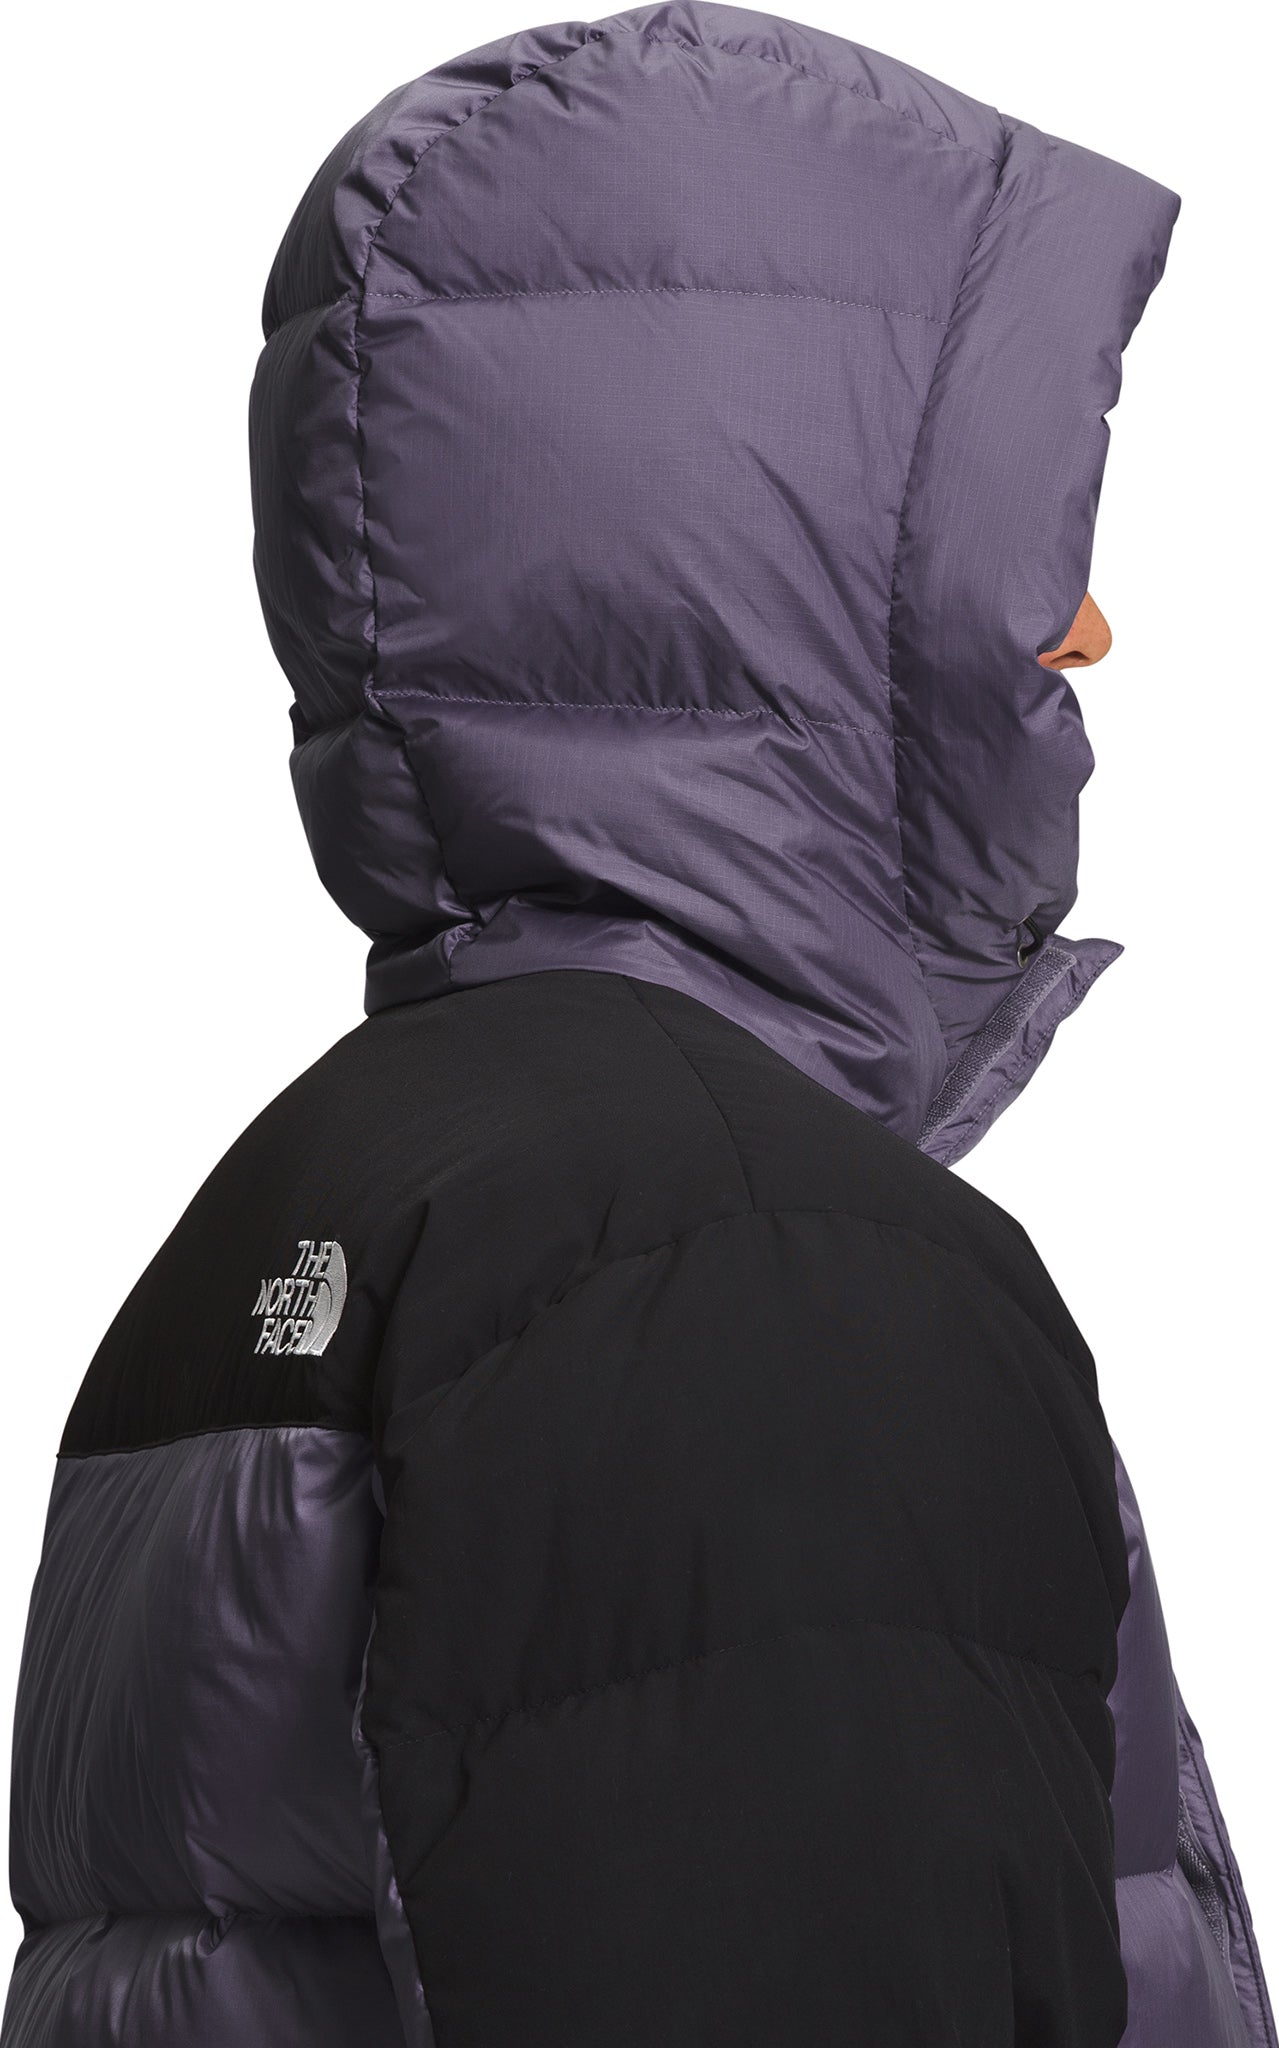 The North Face HMLYN Down Parka - Men's | Altitude Sports